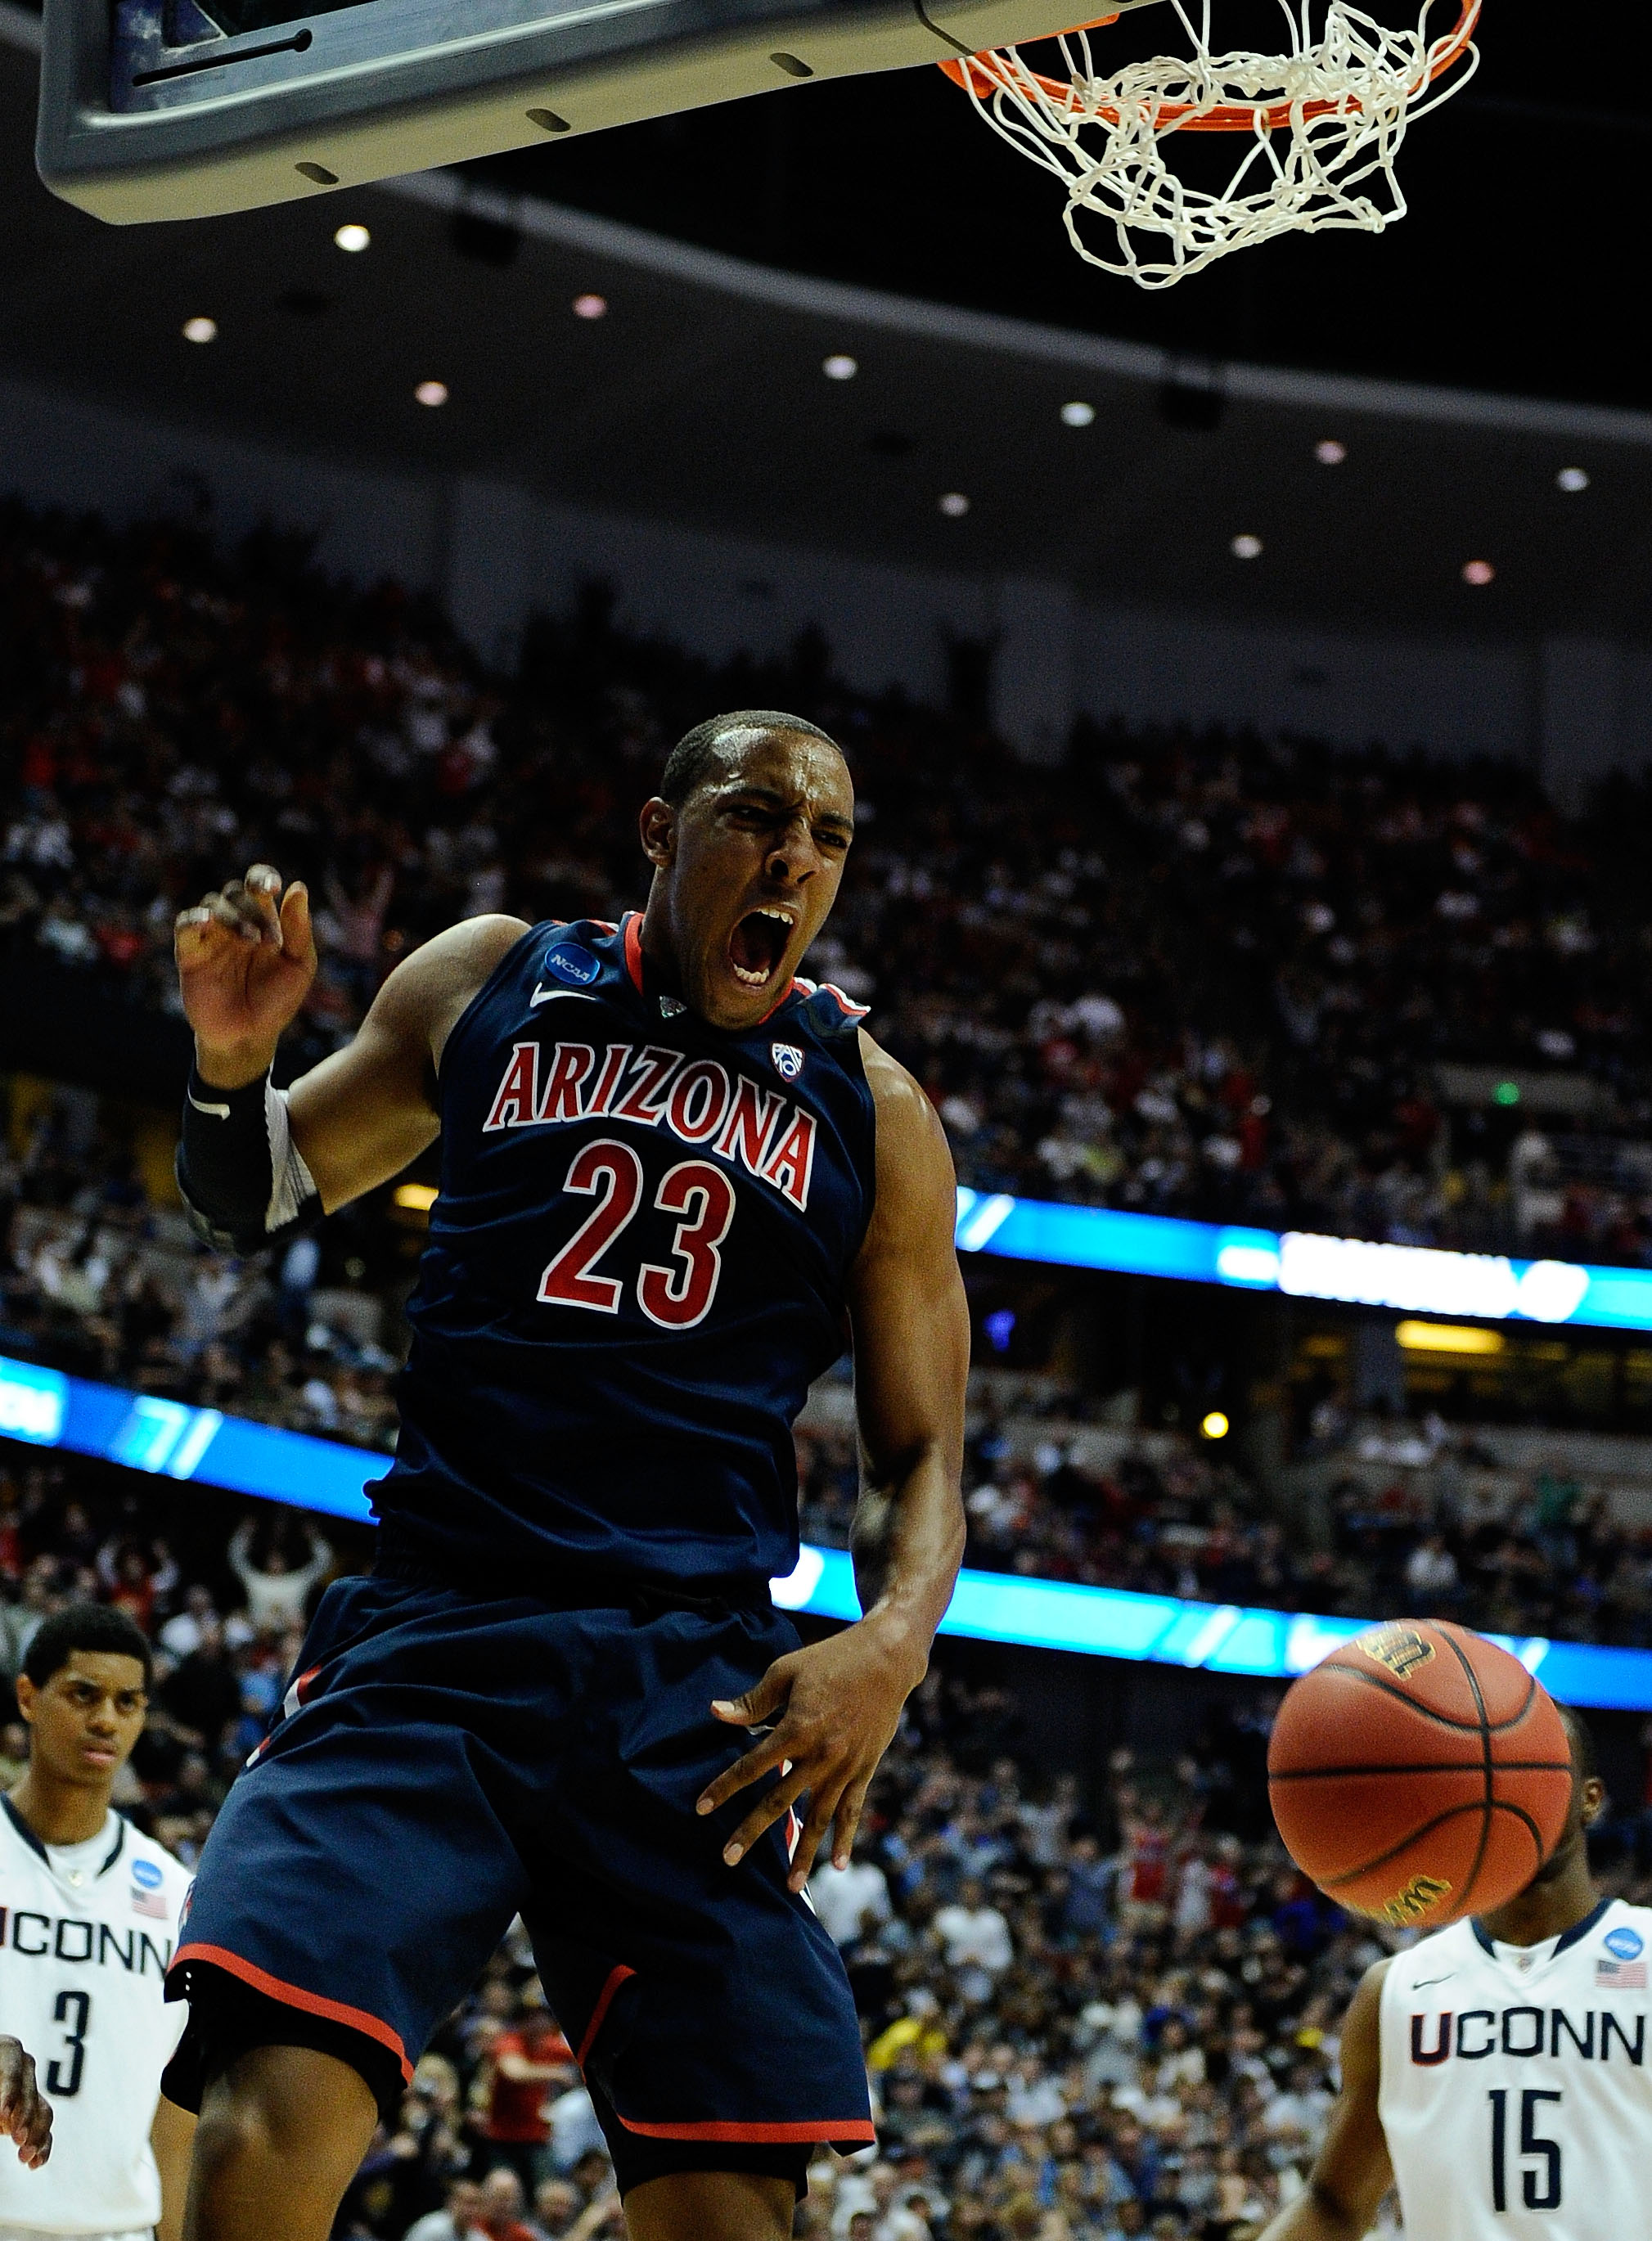 ANAHEIM, CA - MARCH 26:  Derrick Williams #23 of the Arizona Wildcats reacts after a dunk against of the Connecticut Huskies during the west regional final of the 2011 NCAA men's basketball tournament at the Honda Center on March 26, 2011 in Anaheim, Cali